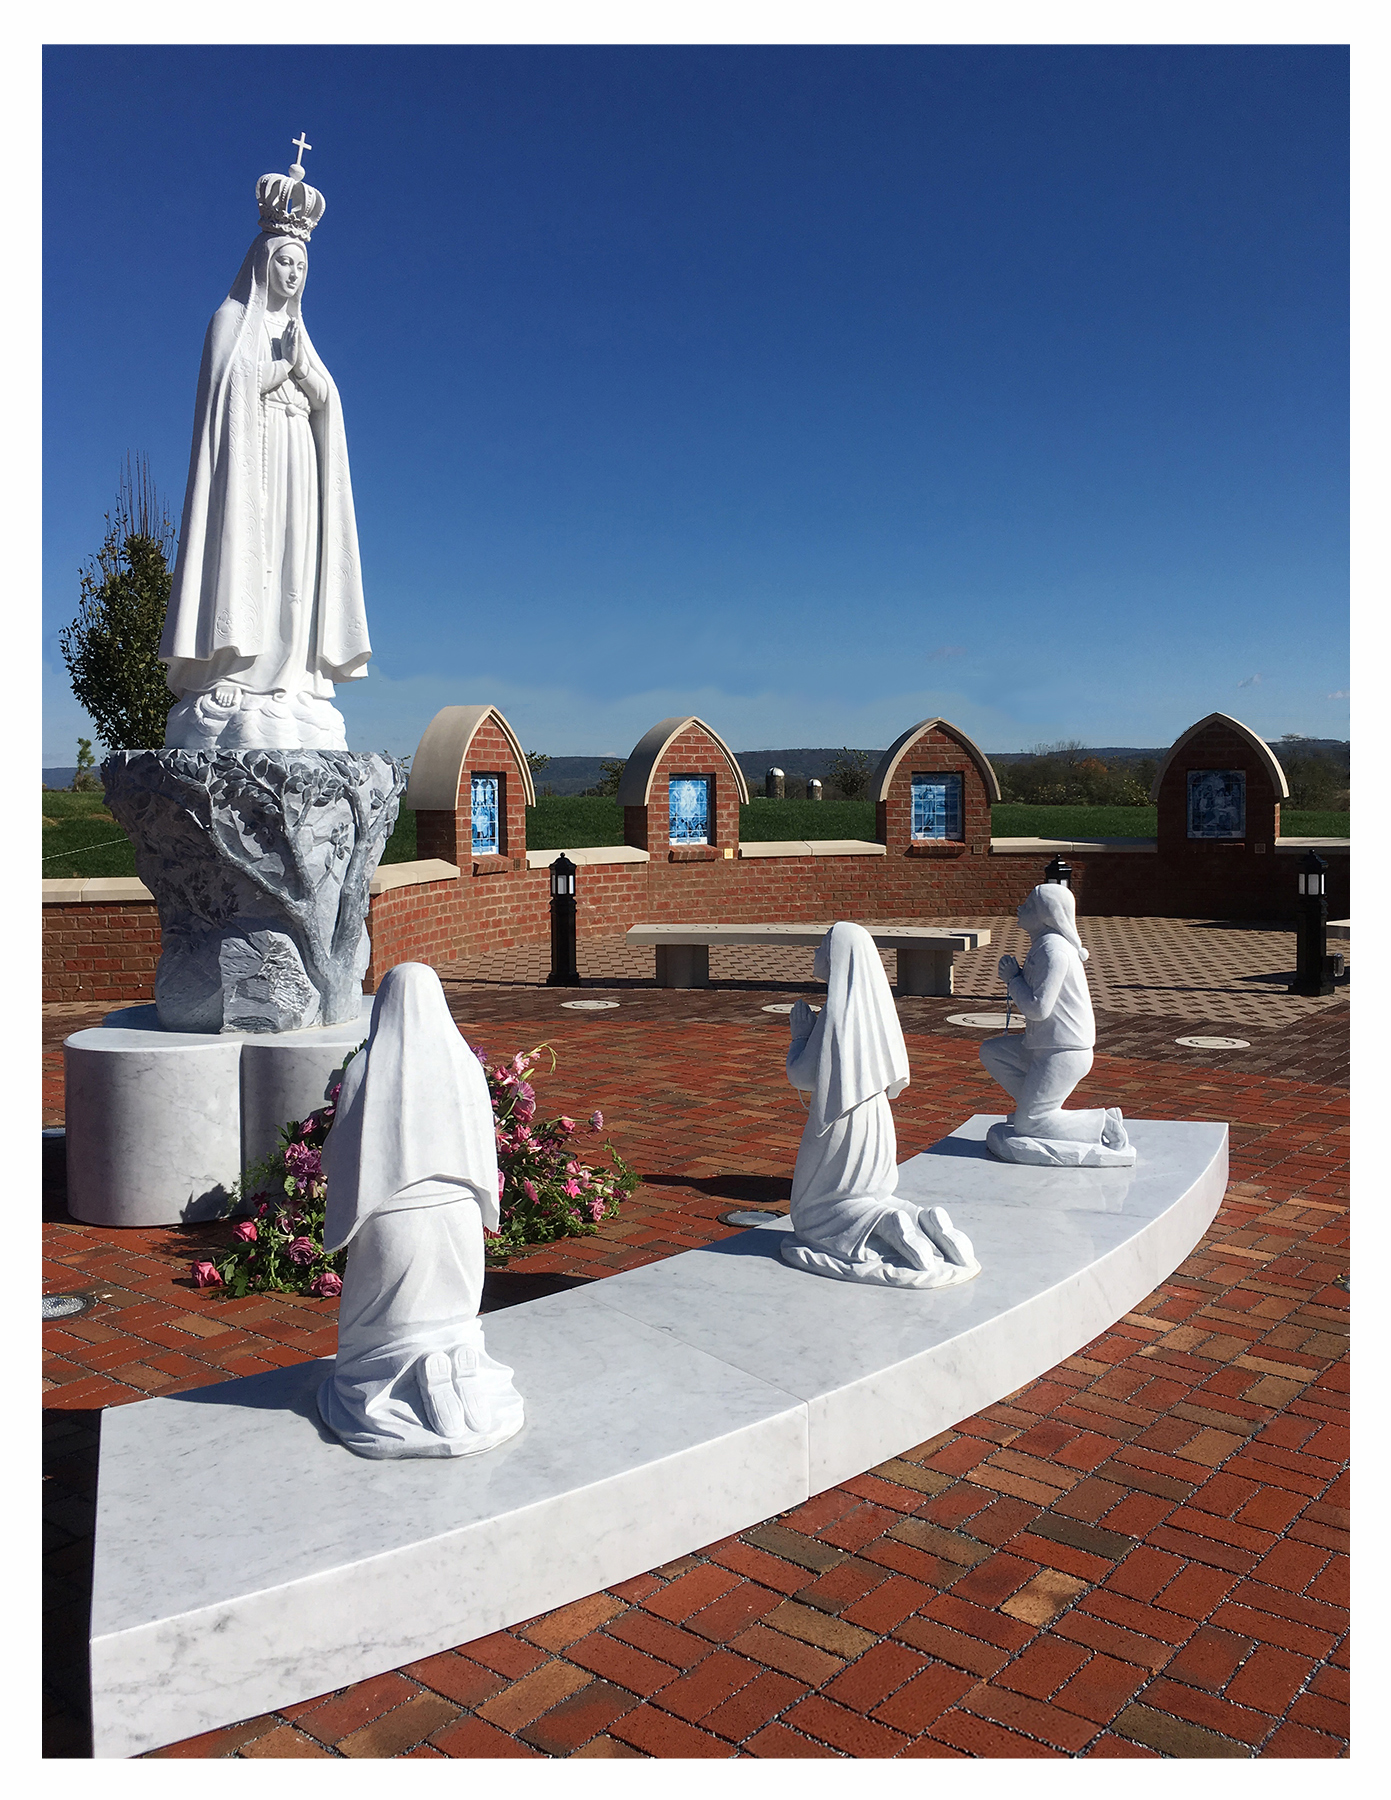 0730-5 St. James Catholic Church-Our Lady of Fatima Shrine Statues of Mary and The Children